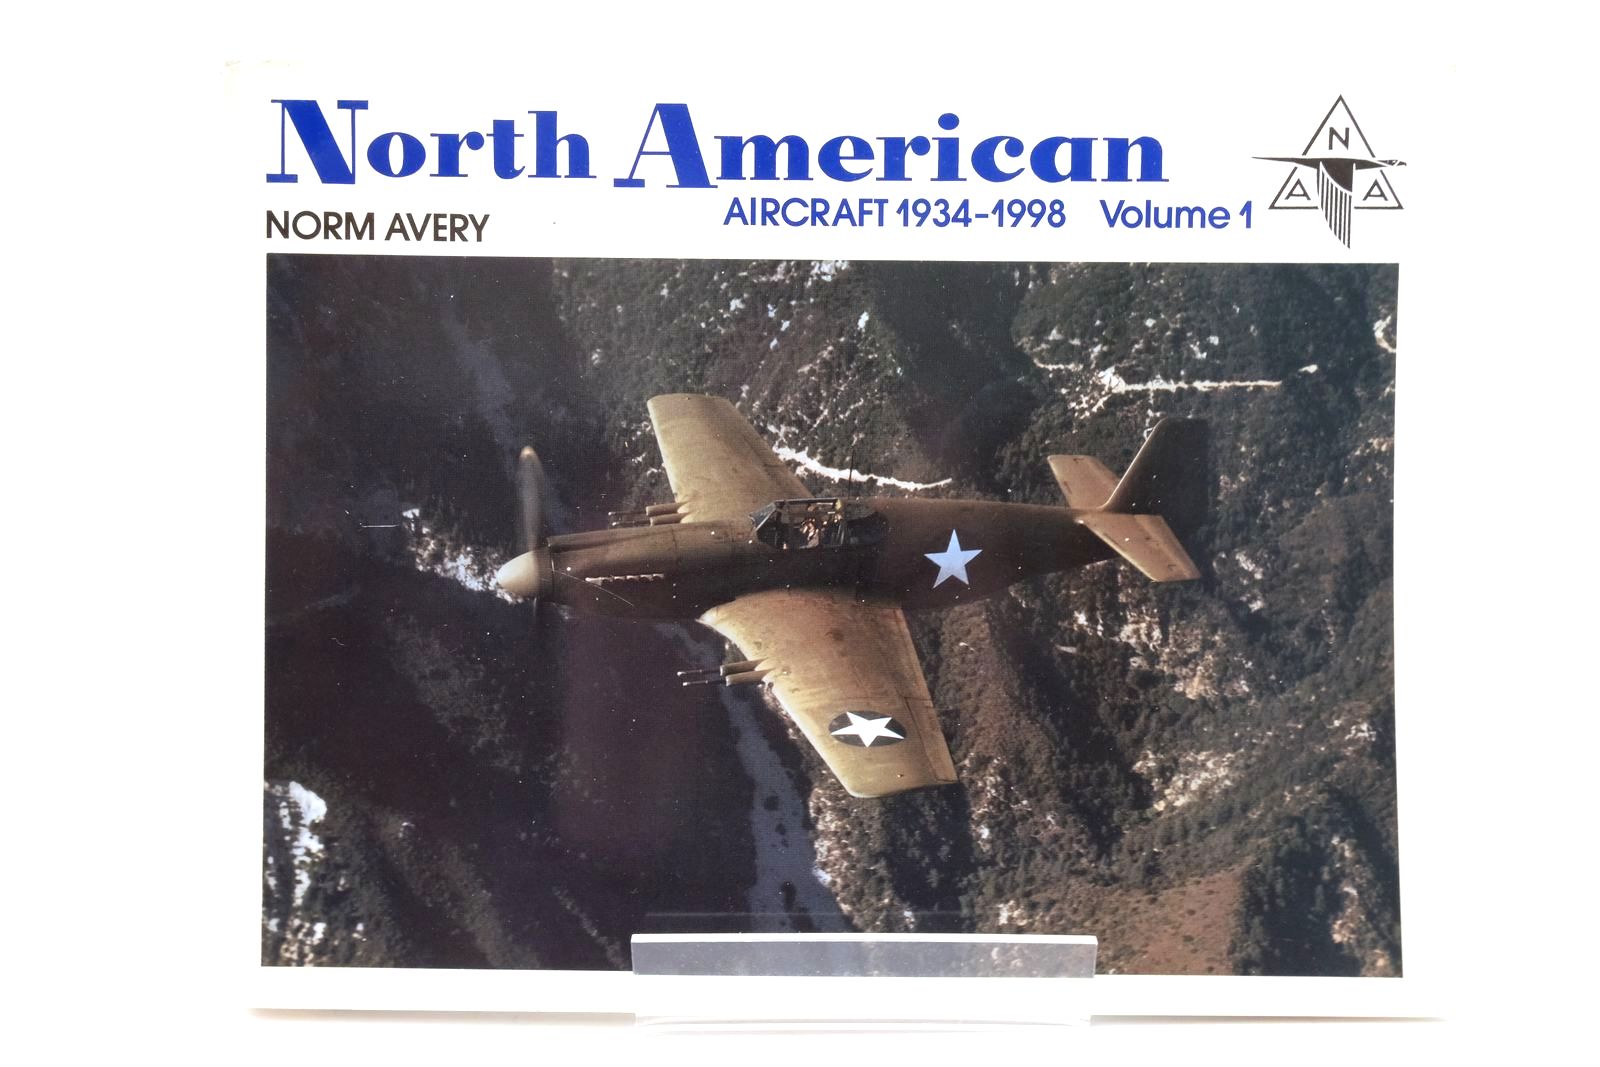 Photo of NORTH AMERICAN AIRCRAFT 1934-1998 VOLUME 1 written by Avery, Norm published by Jonathan Thompson, Narkiewicz Thompson (STOCK CODE: 2138706)  for sale by Stella & Rose's Books